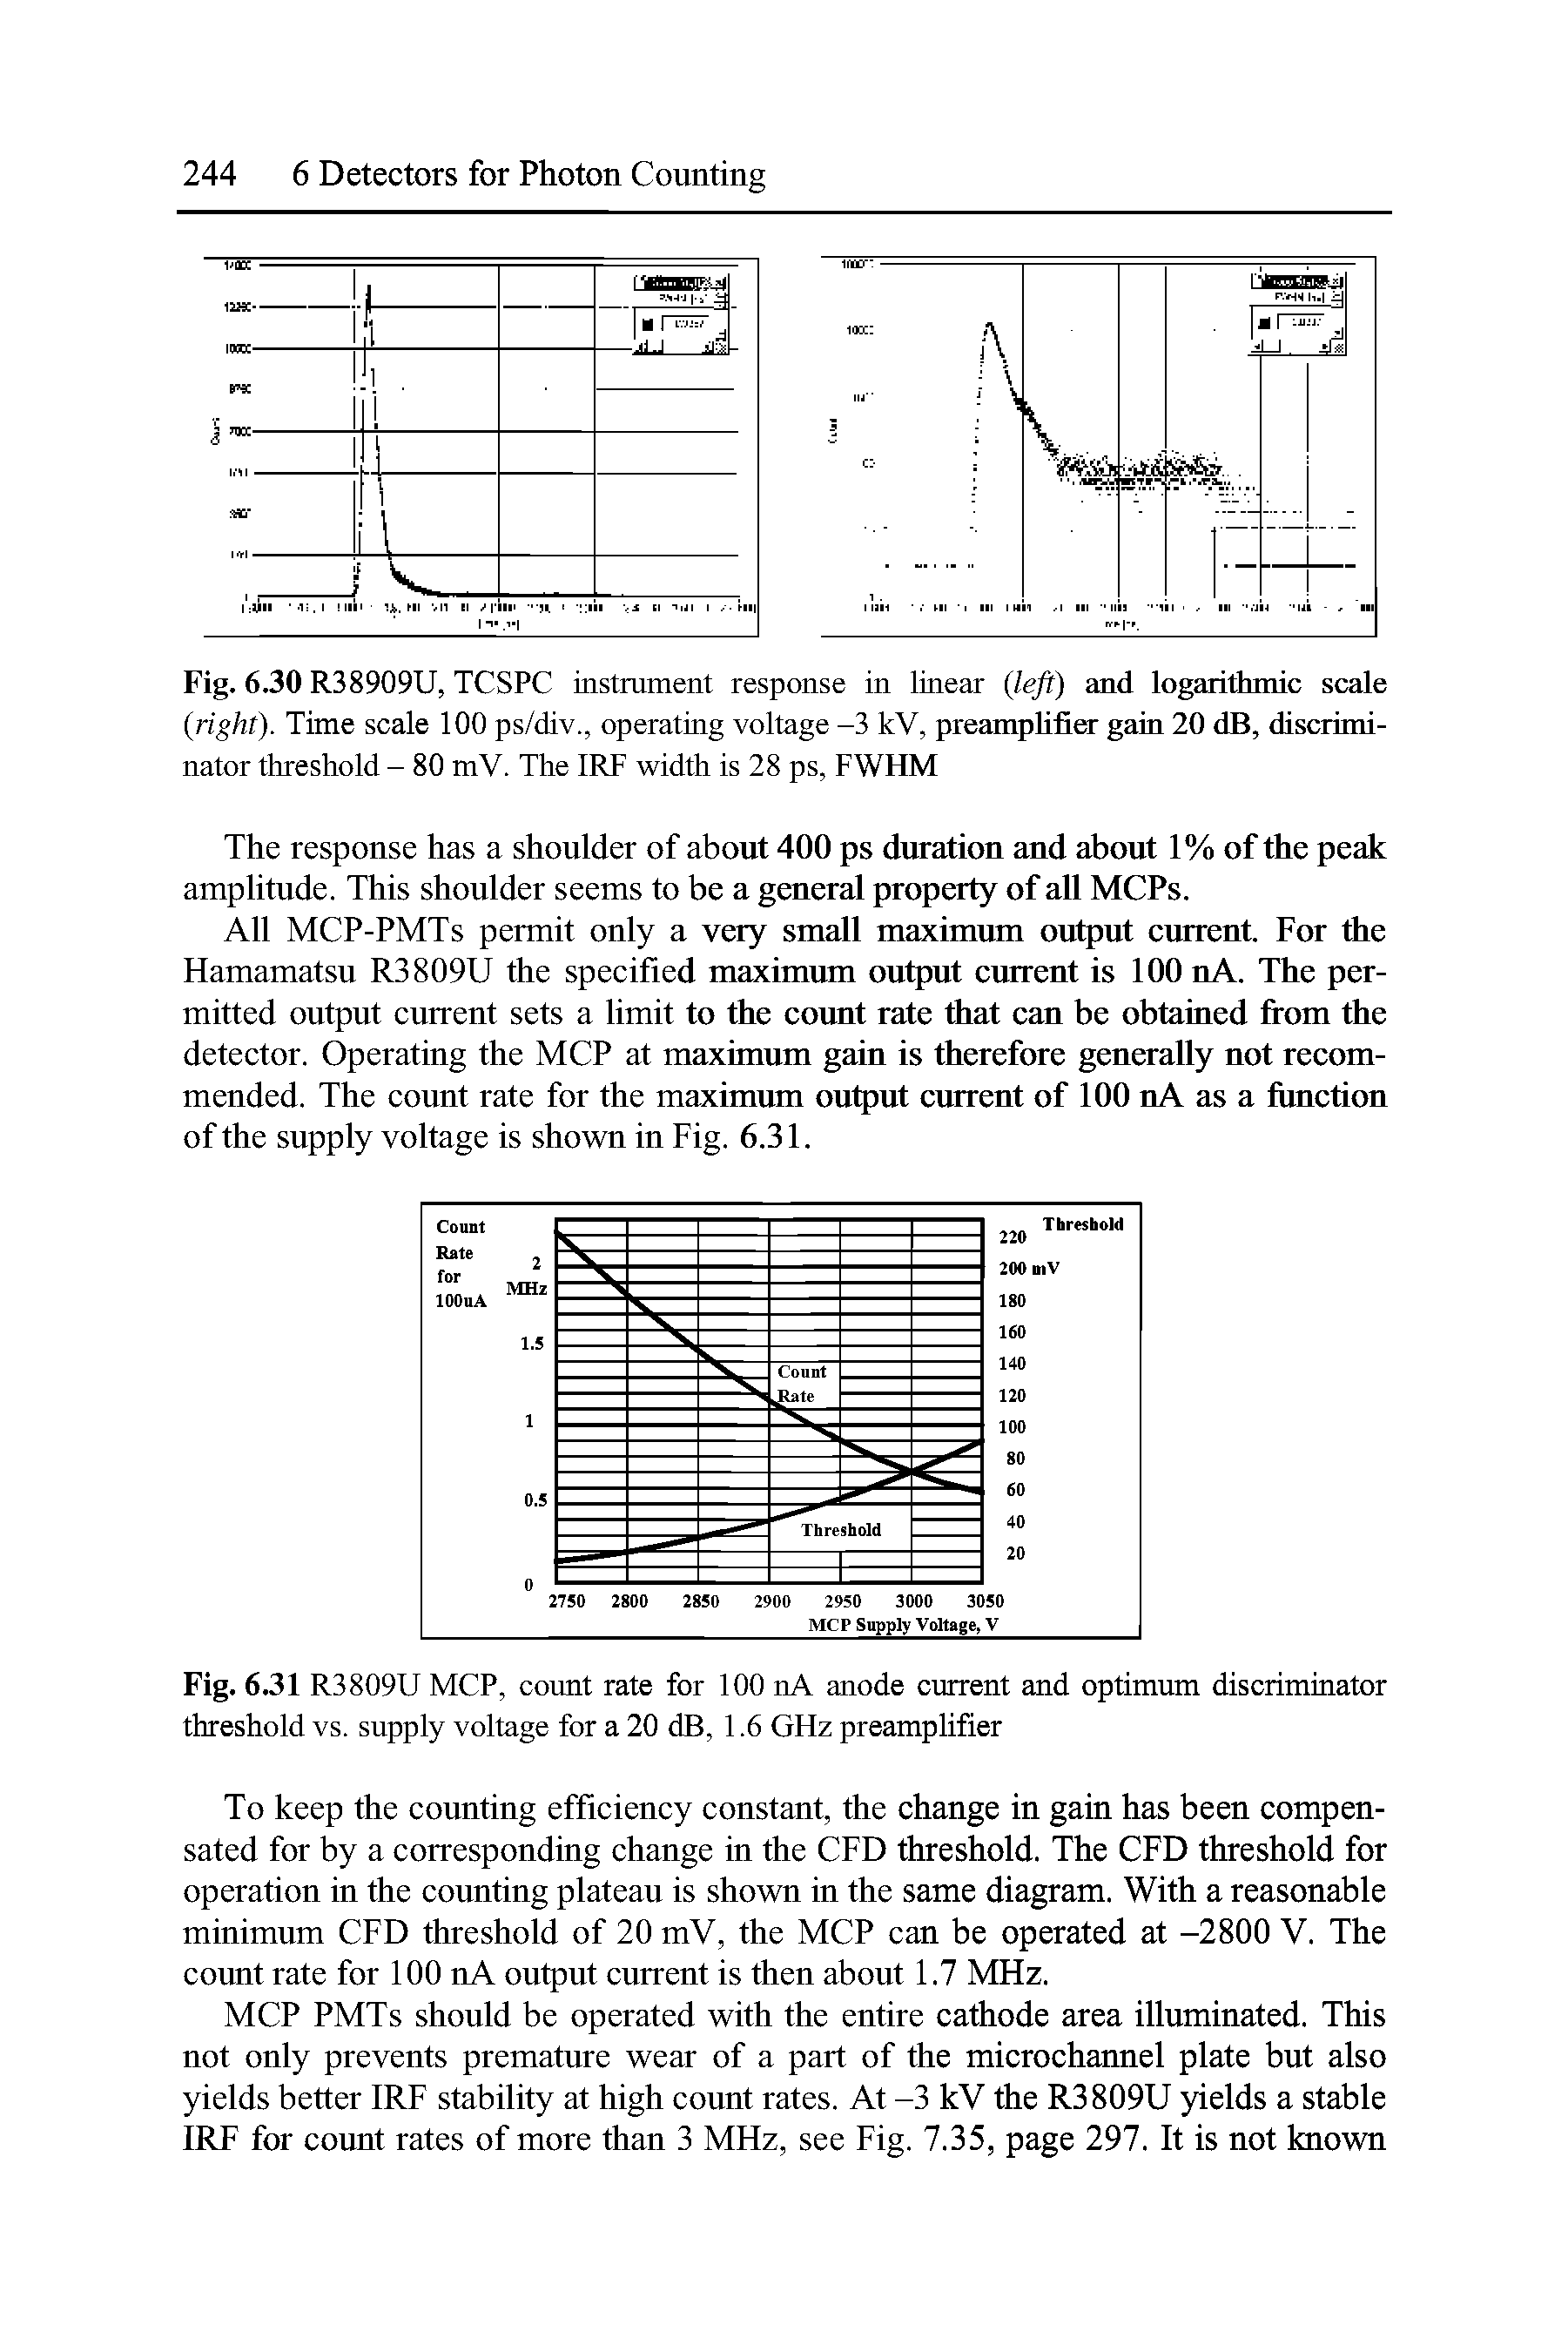 Fig. 6.31 R3809U MCP, count rate for 100 nA anode current and optimum discriminator threshold vs. supply voltage for a 20 dB, 1.6 GHz preamplifier...